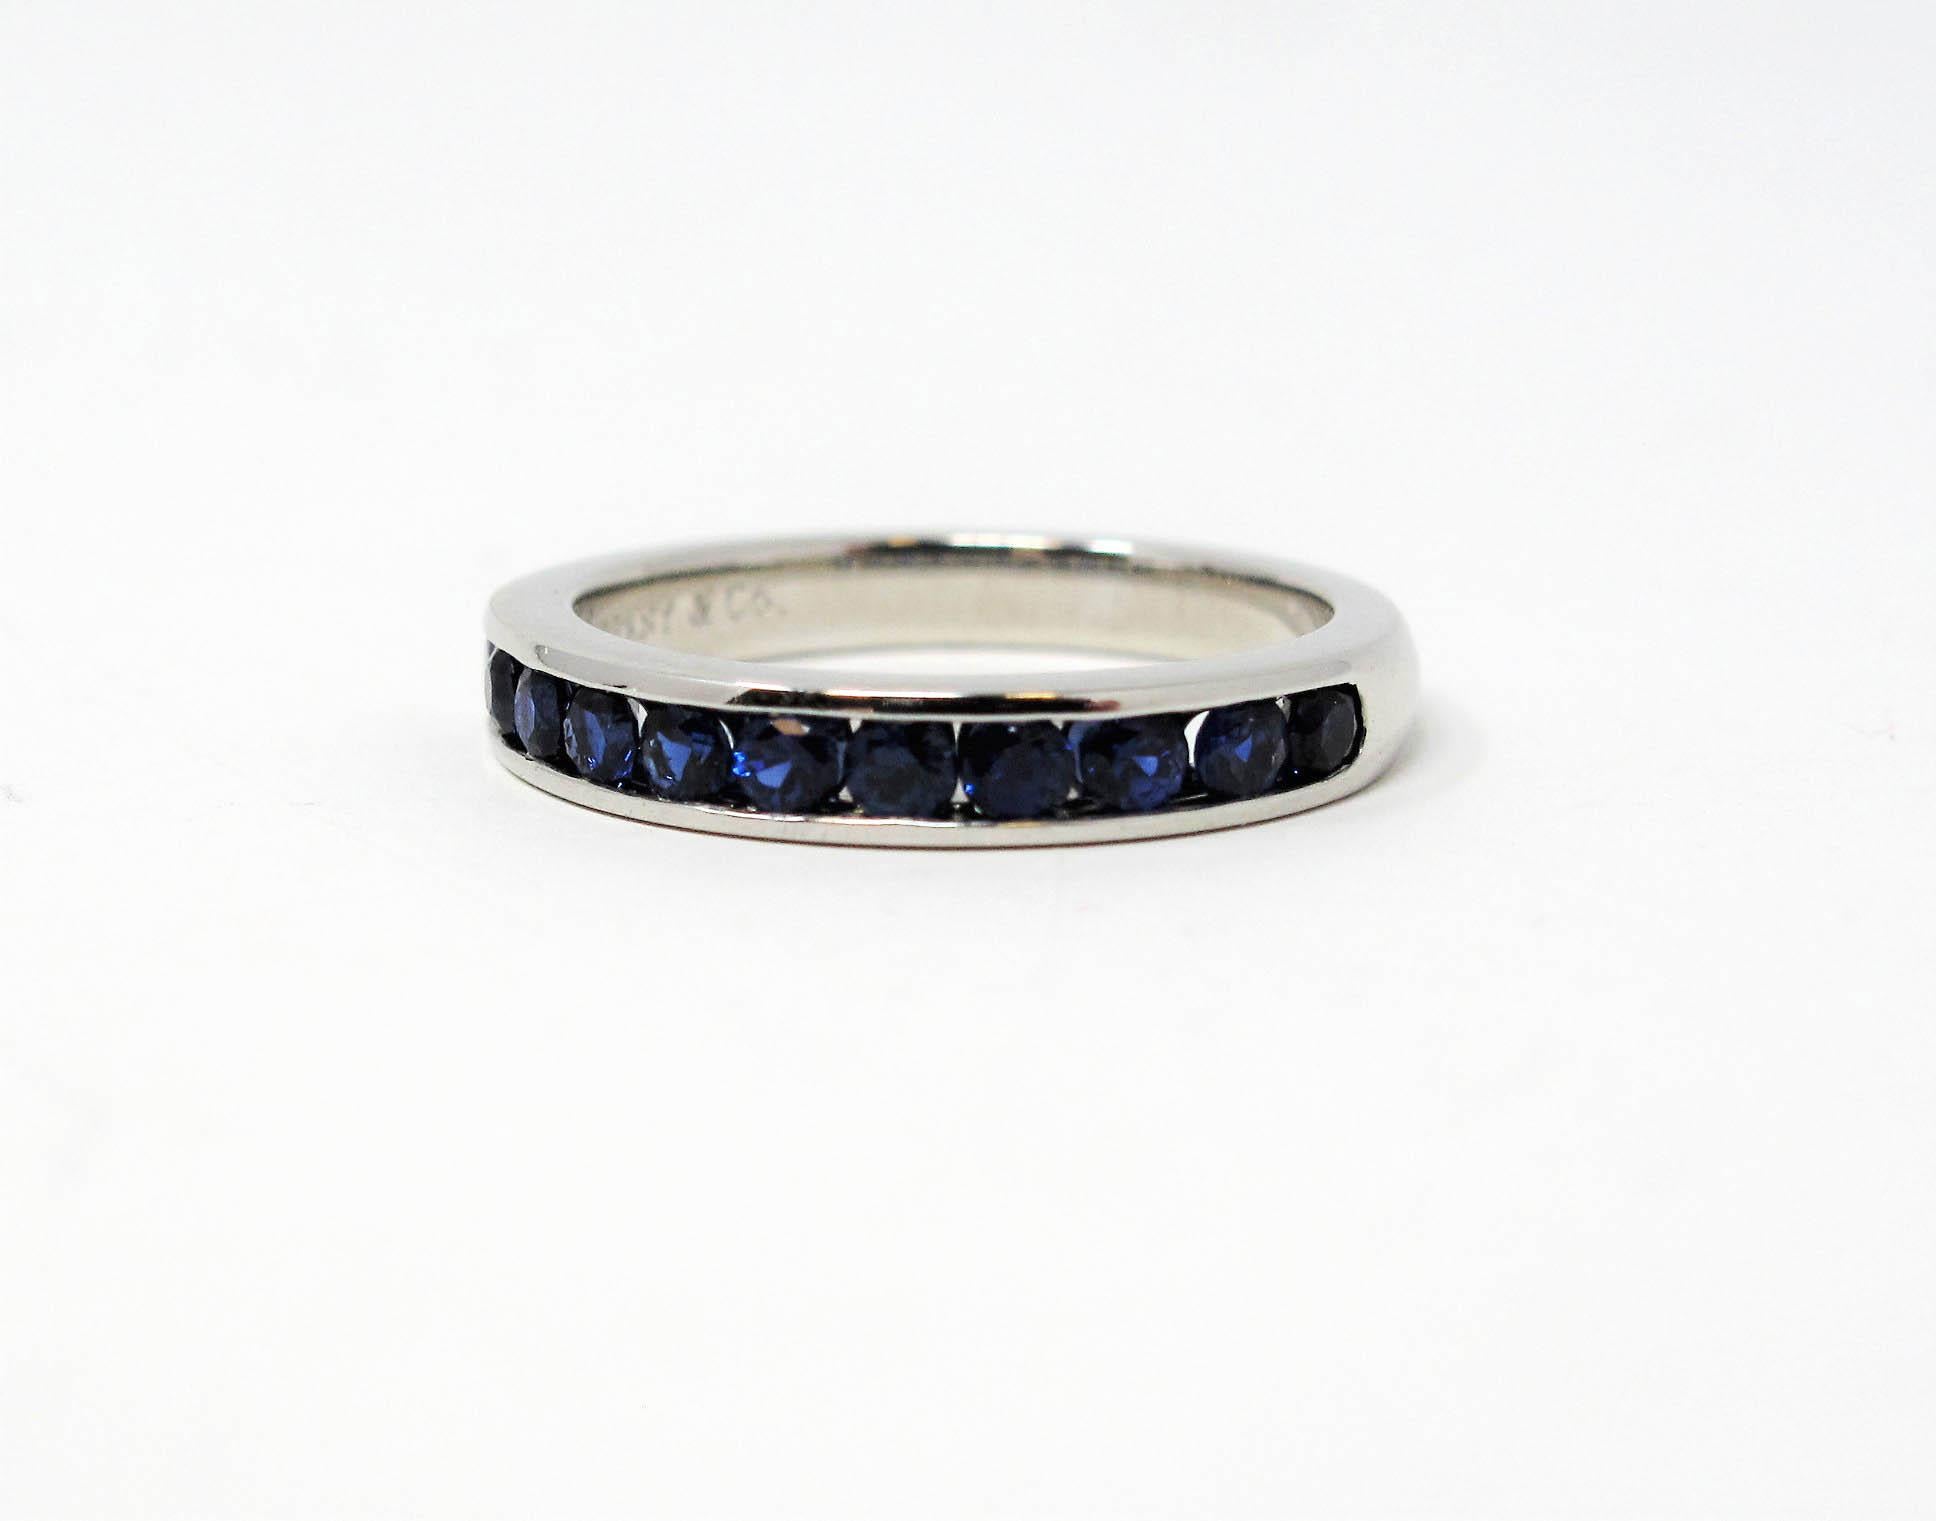 Ring size: 5

Stunning Tiffany & Co. sapphire semi eternity band ring. This timeless beauty features brilliant blue sapphires channel set in a single elegant row. The sleek polished band has a modern, yet feminine feel. It would be stunning paired